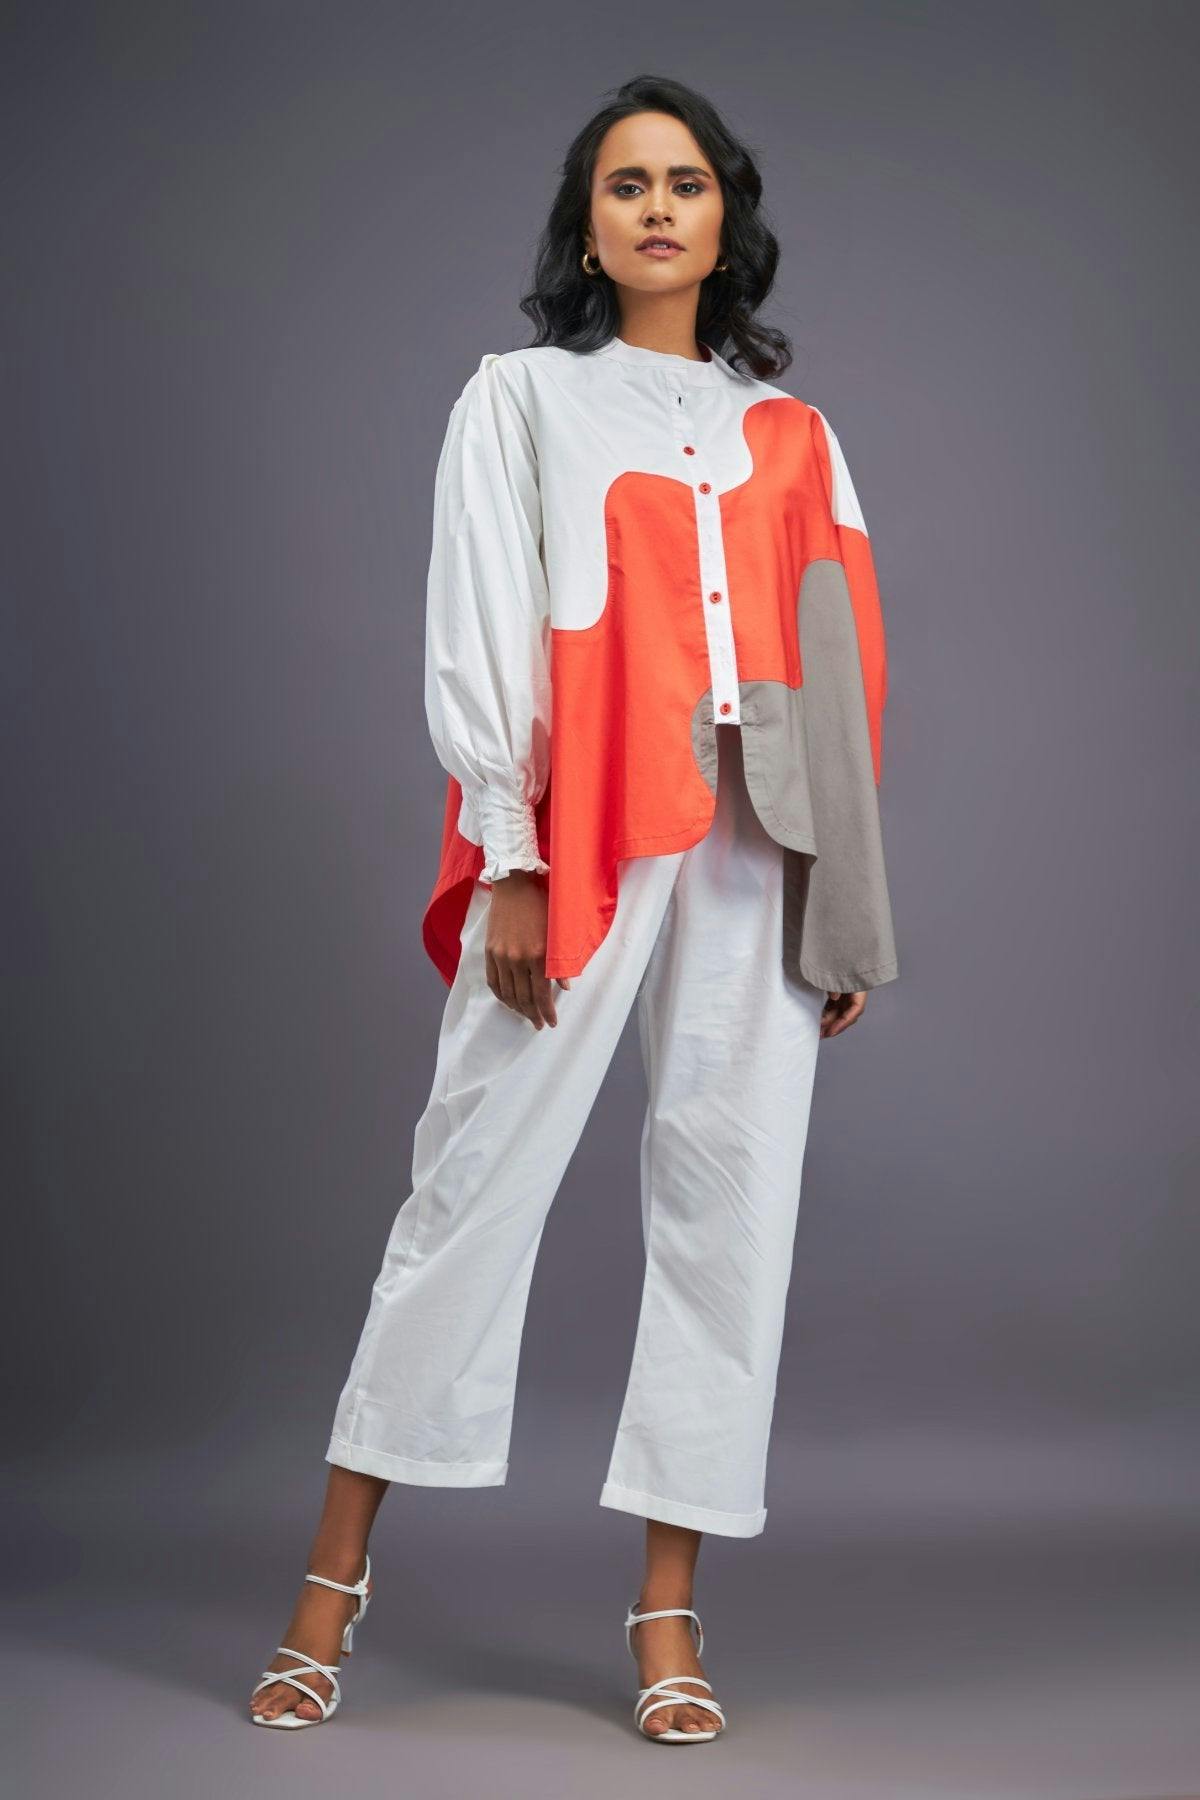 BB-1111-OG - White Orange Shirt With Curve Cut Pattern, a product by Deepika Arora